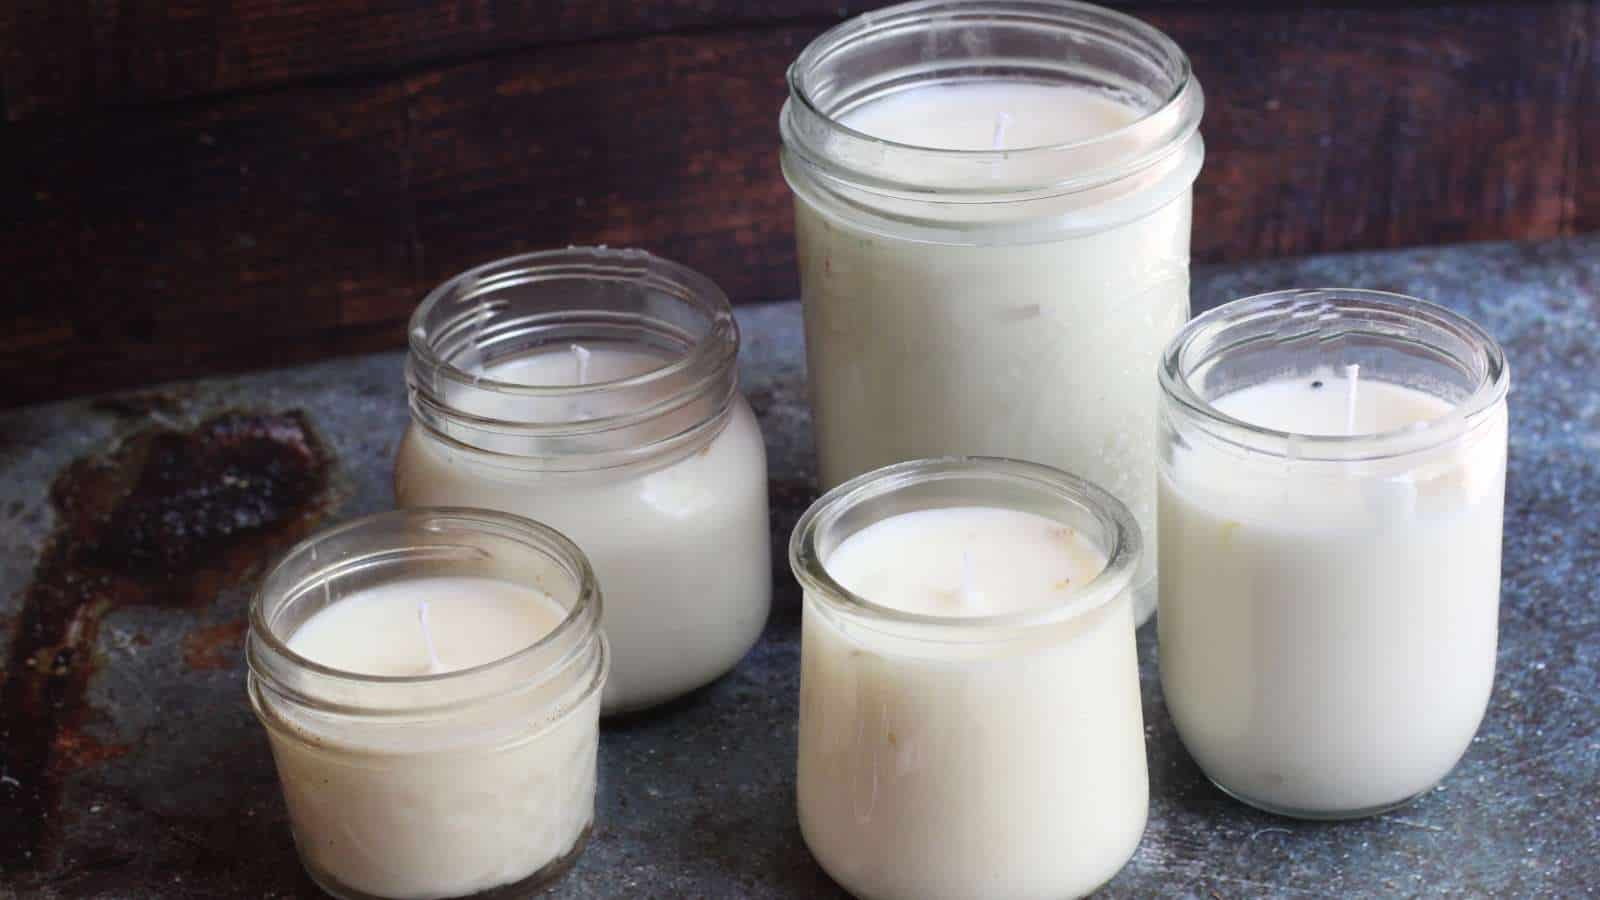 Four mason jars filled with white homemade emergency candles.